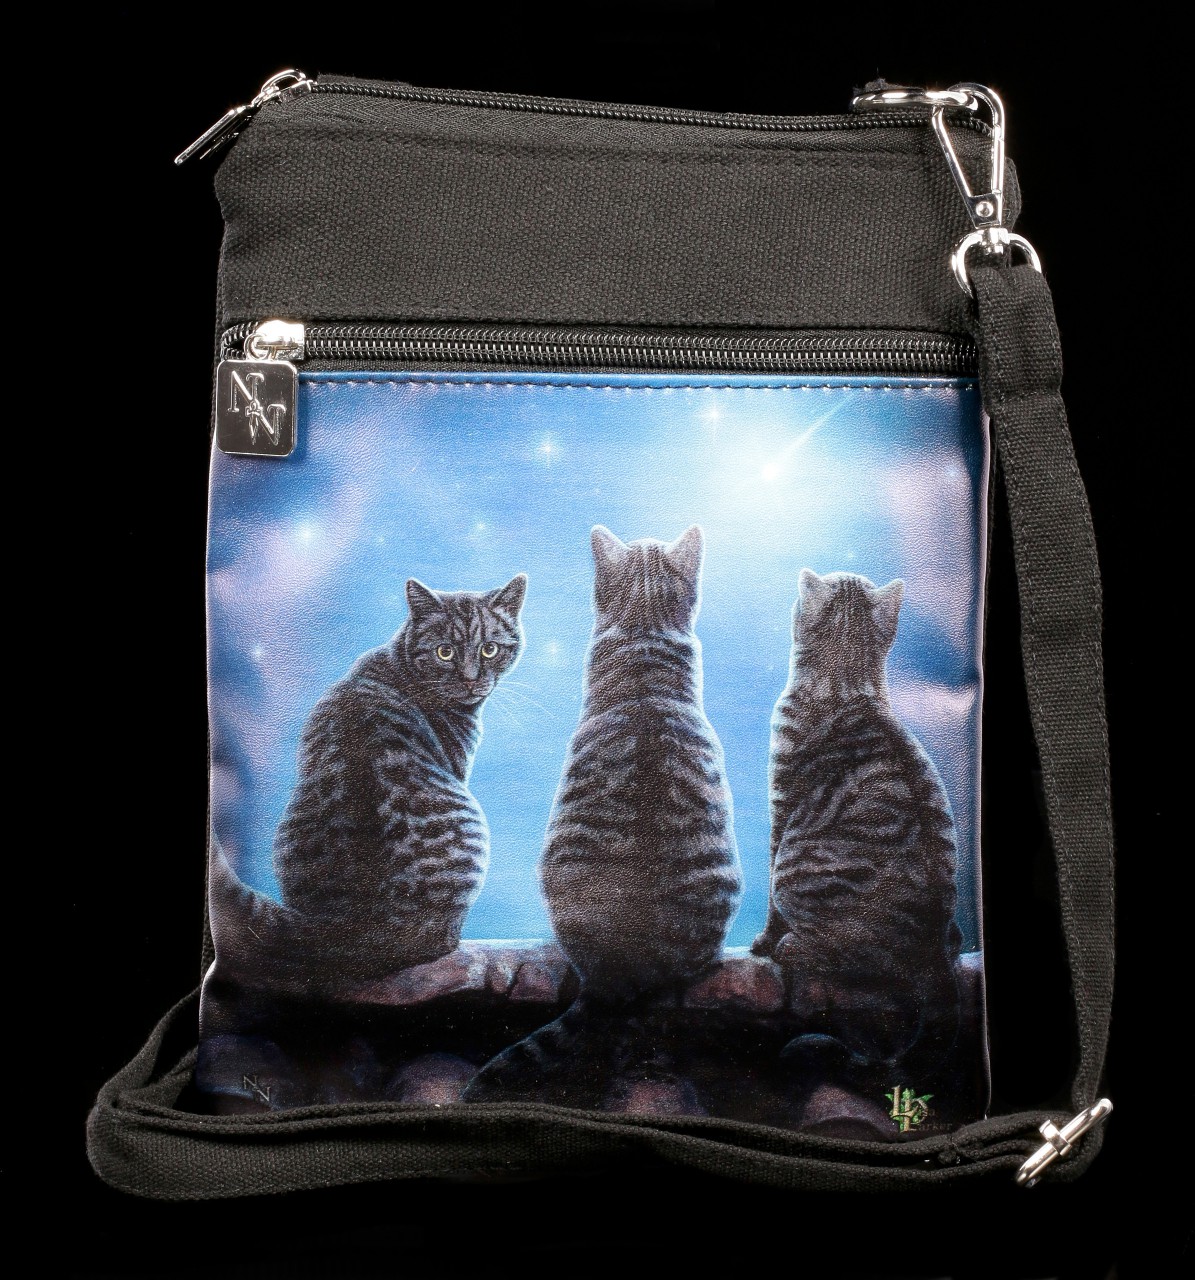 Small Shoulder Bag with Cats - Wish Upon a Star